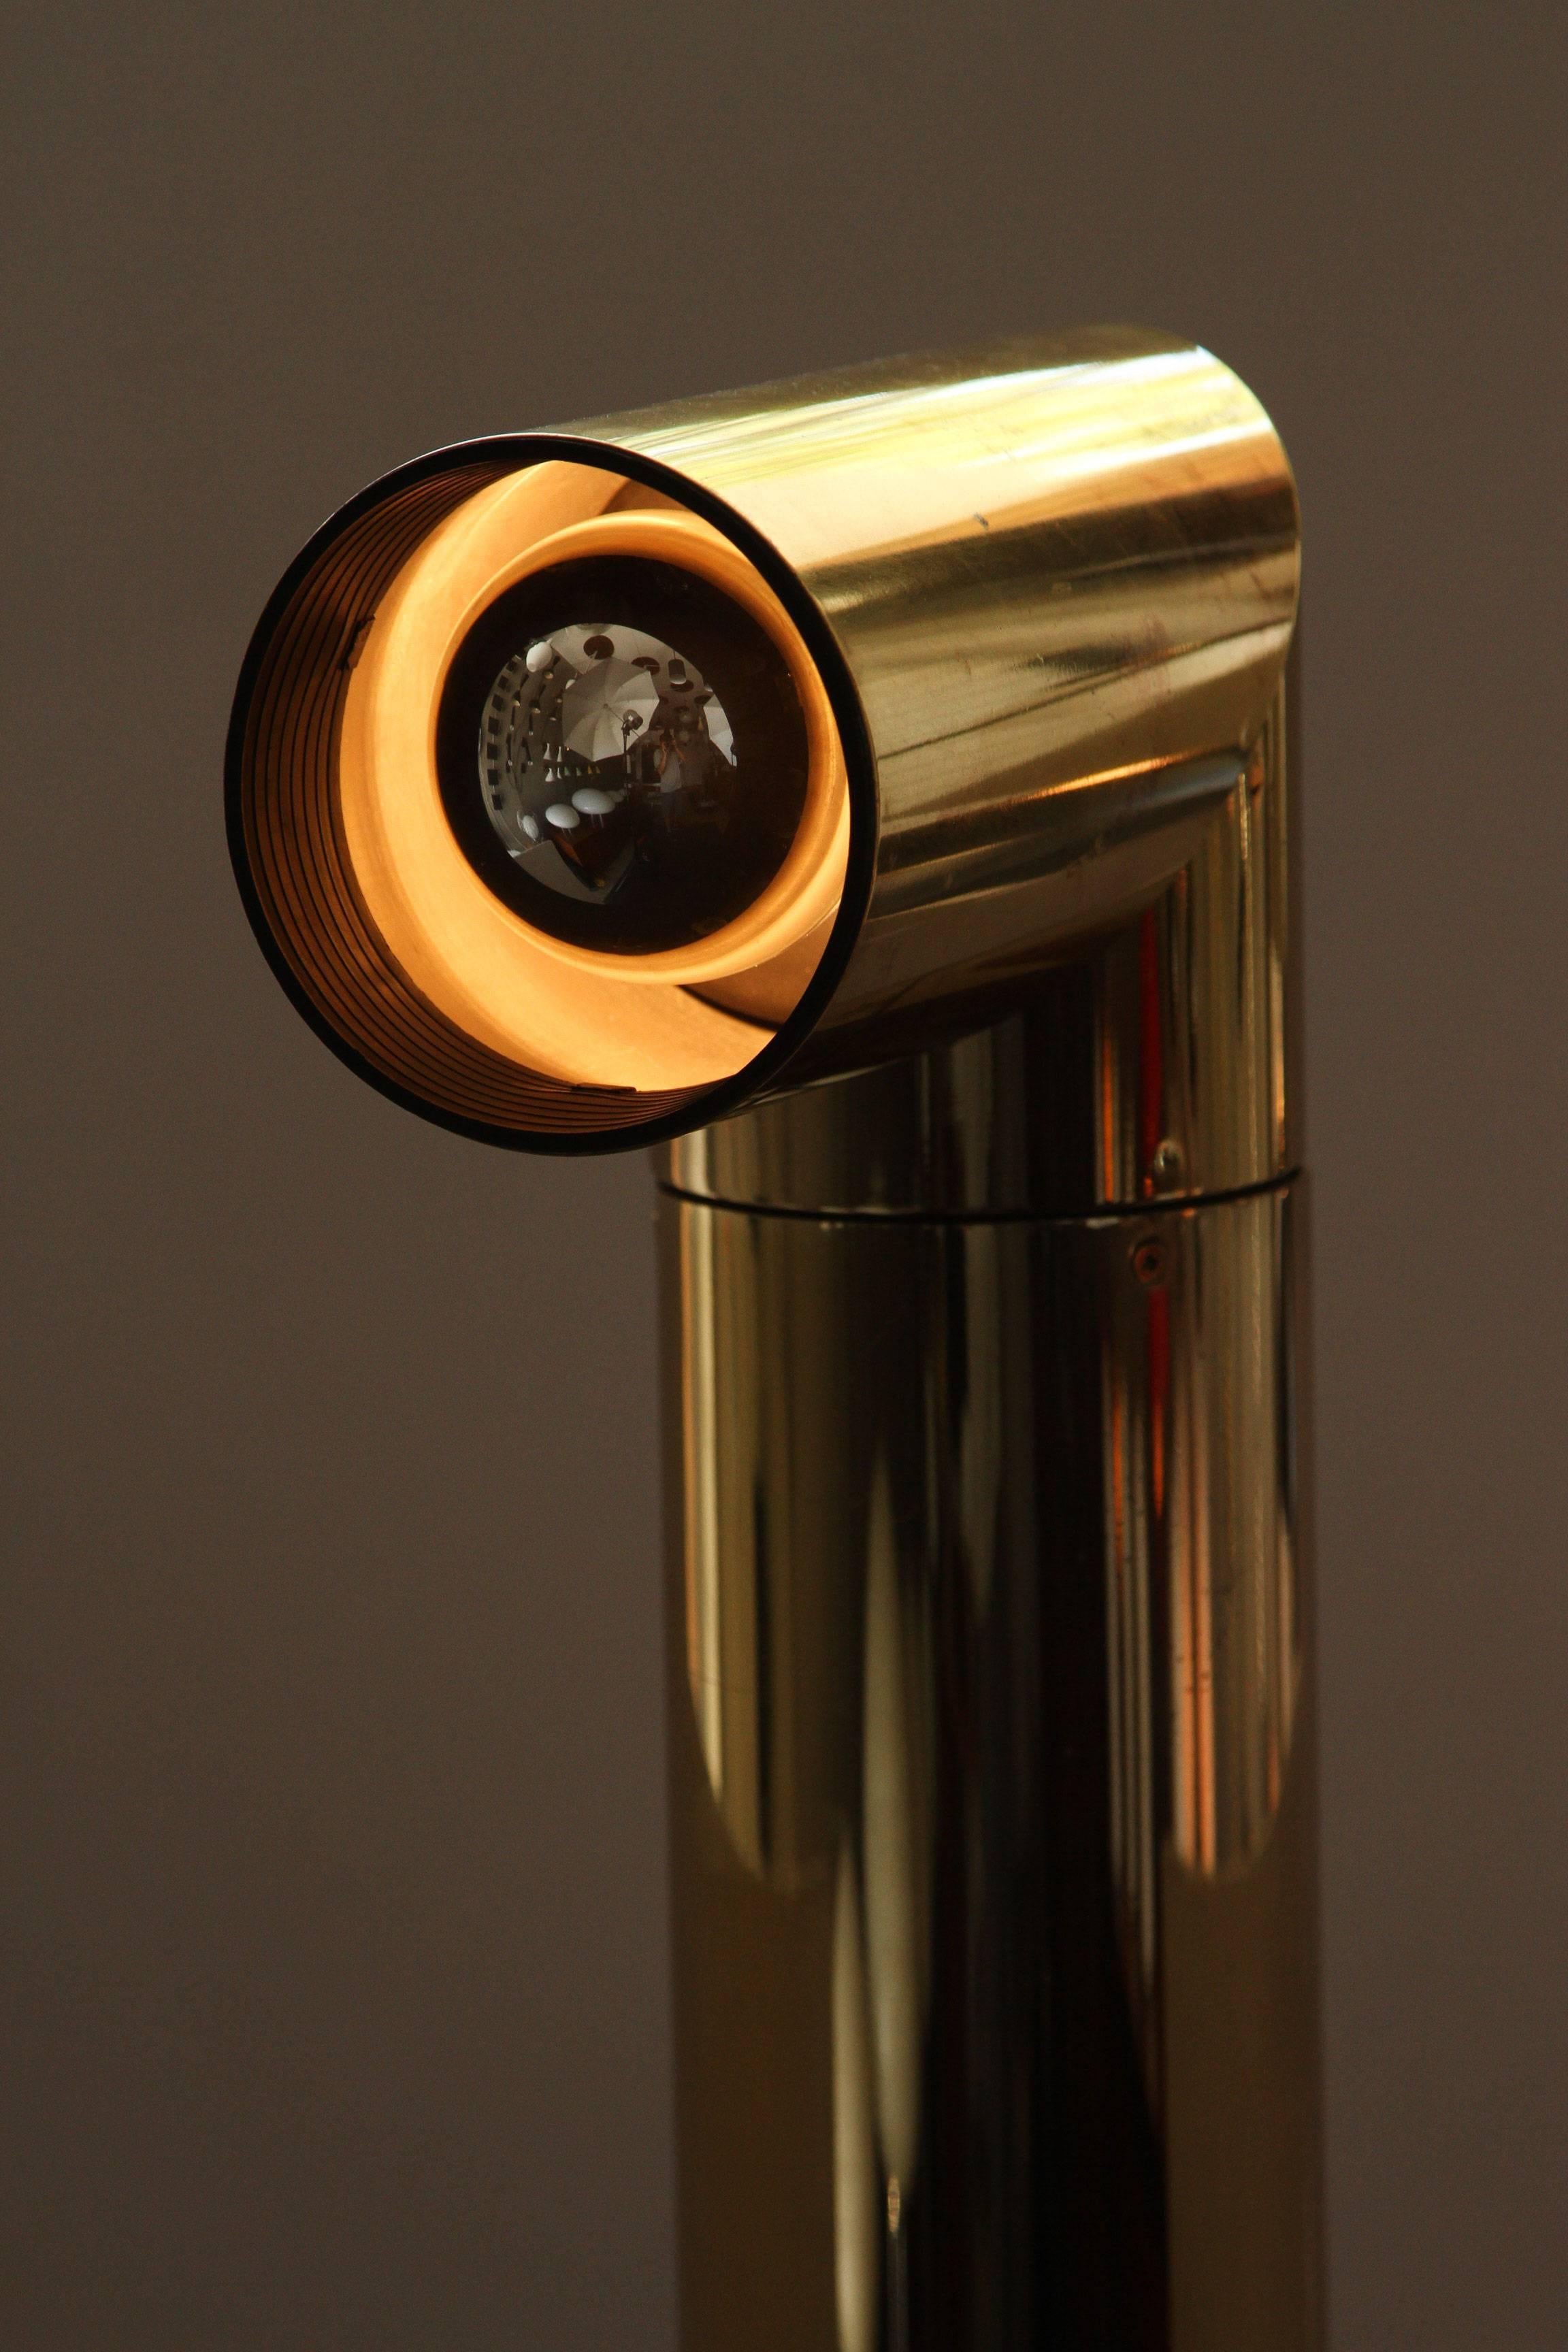 1980s Jonas Hidle floor lamp for Hoviklys. Exceptional architectural floor lamp executed in brass with adjustable top for vertical torchiere or horizontal periscope modes. Made in Norway.